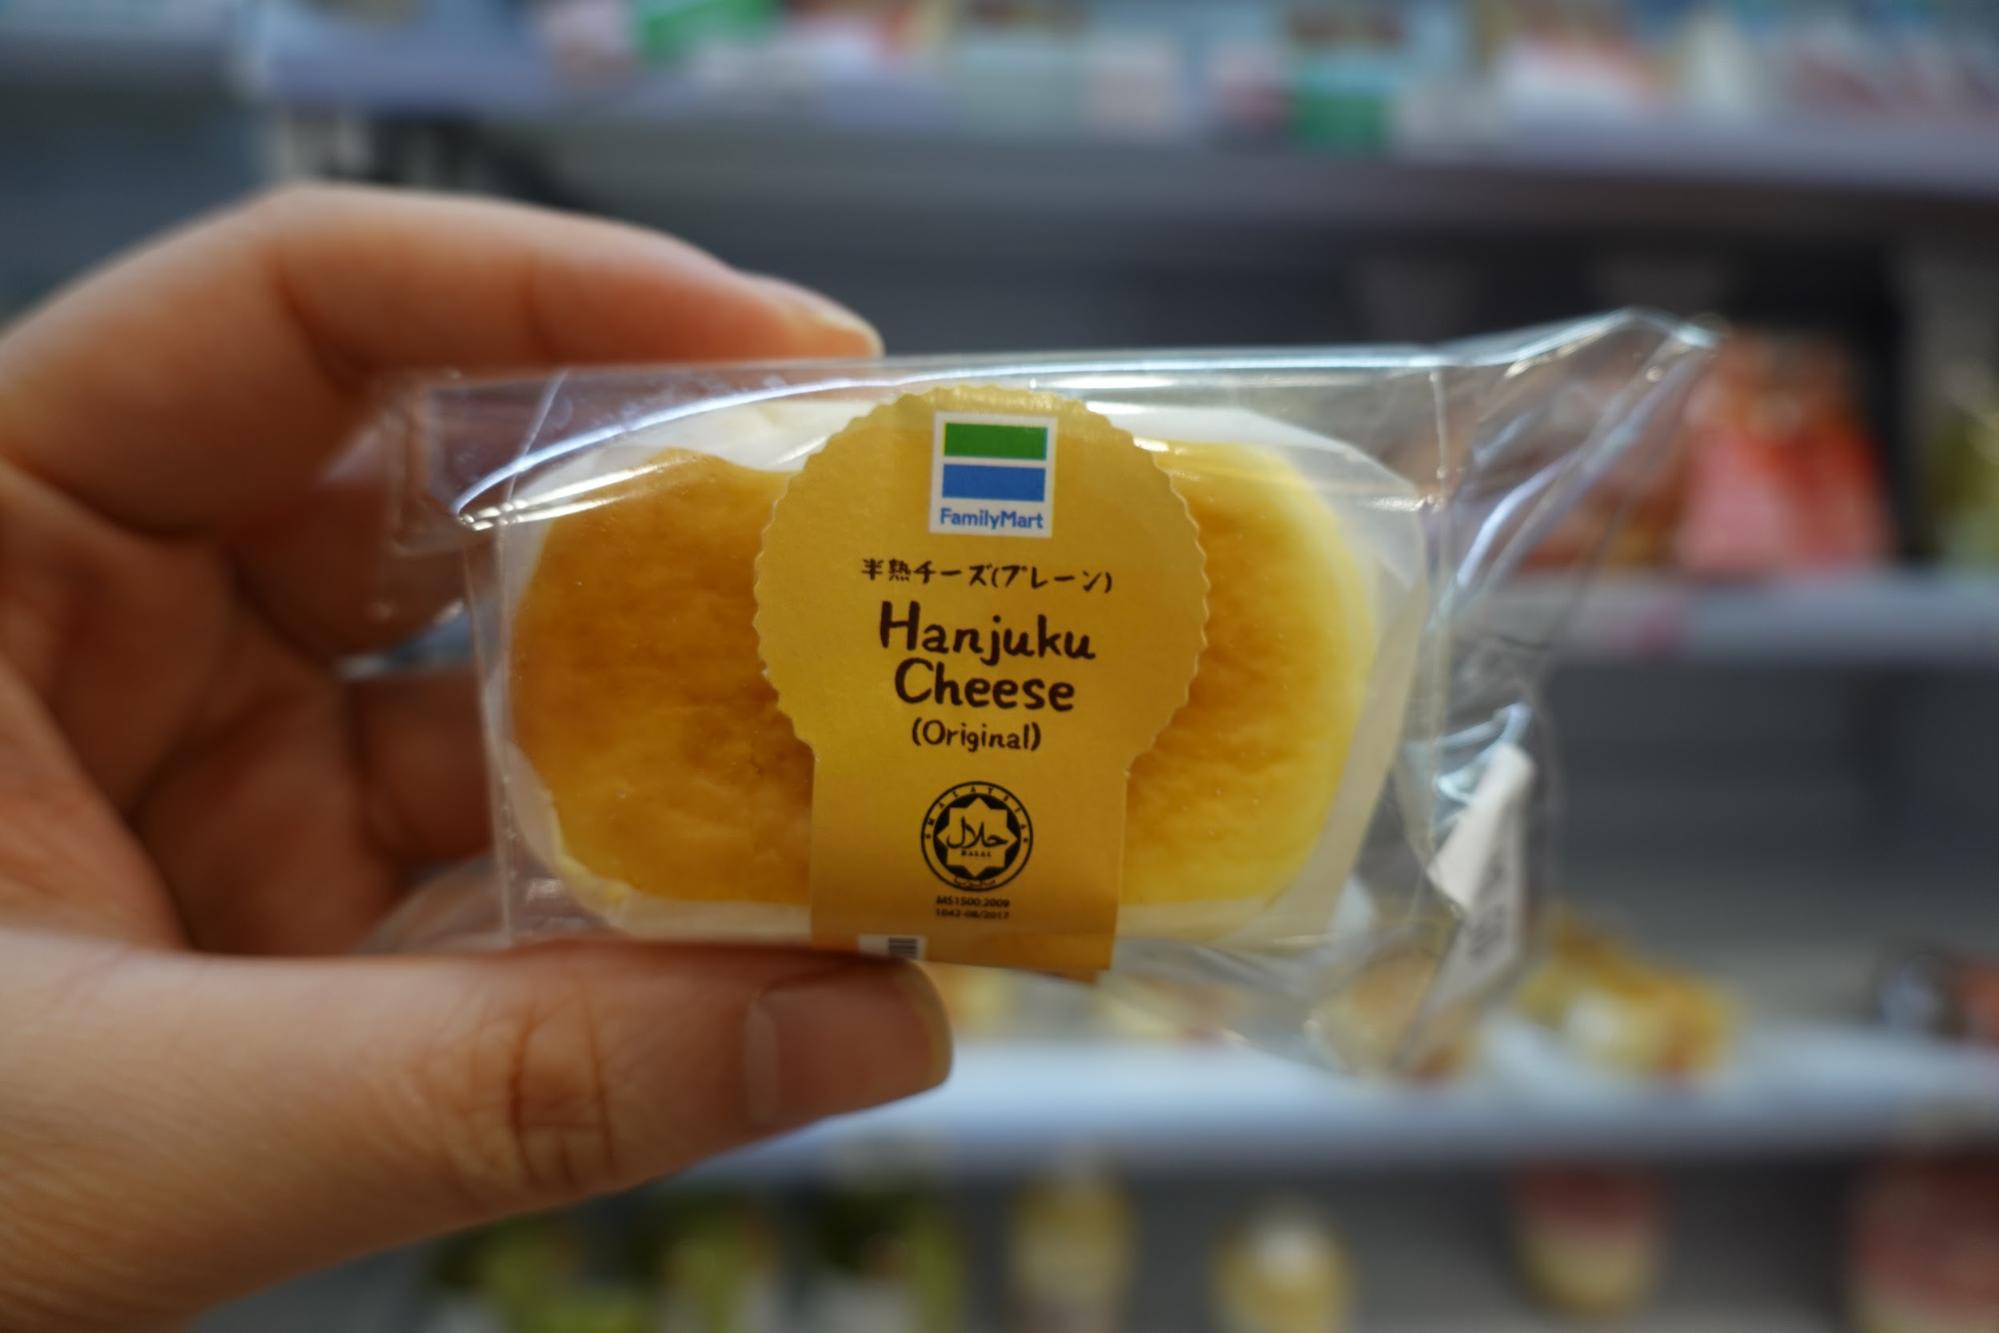 18 Must Buy Food Items From Familymart Malaysia Klook Blog